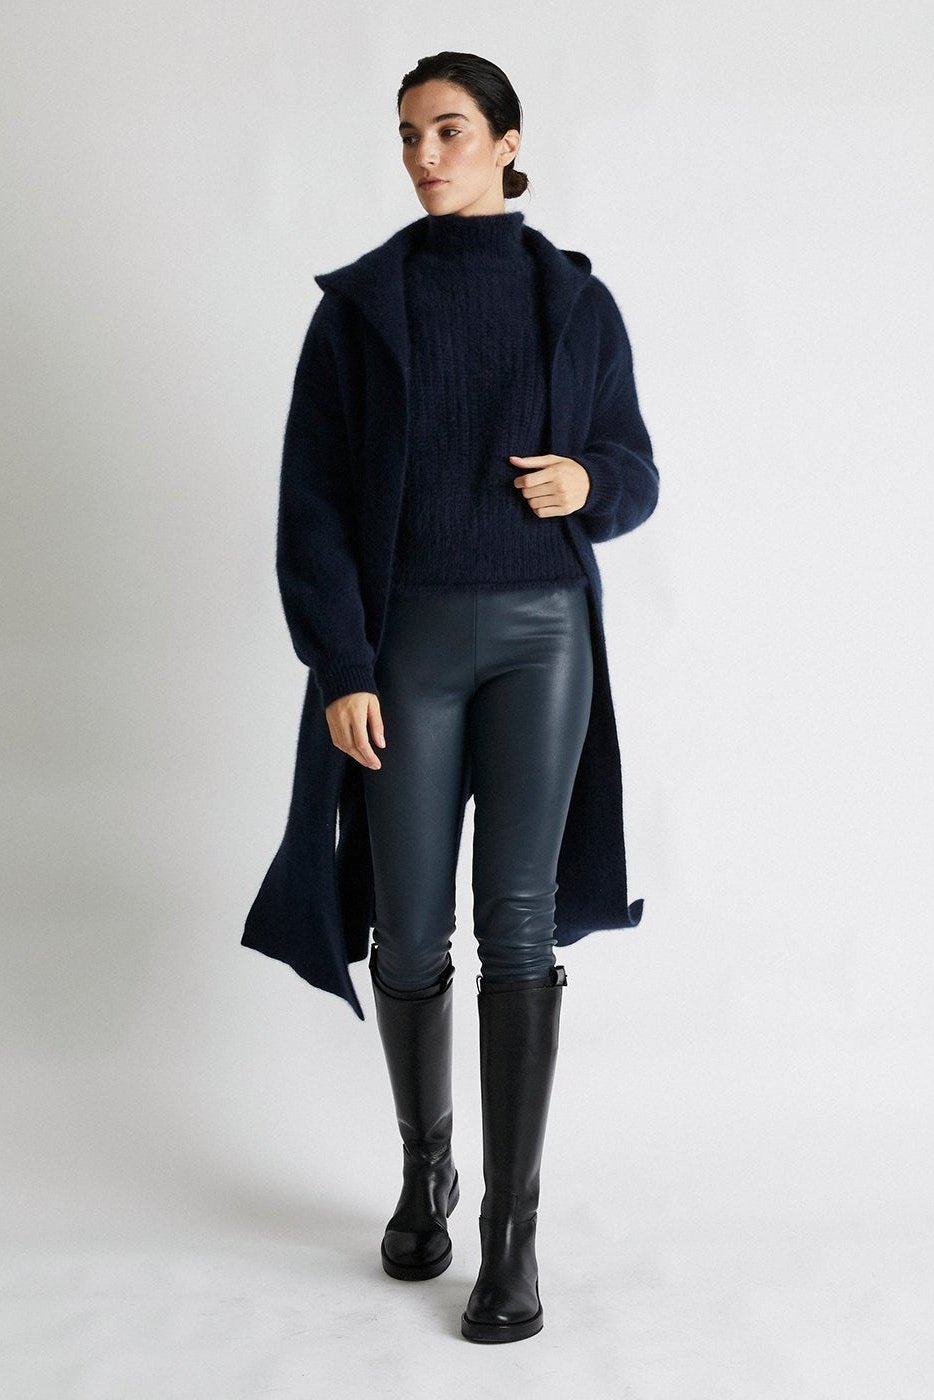 +Beryll Cashmere Coat with Hood | Navy Blue - +Beryll Cashmere Coat with Hood | Navy Blue - +Beryll Worn By Good People